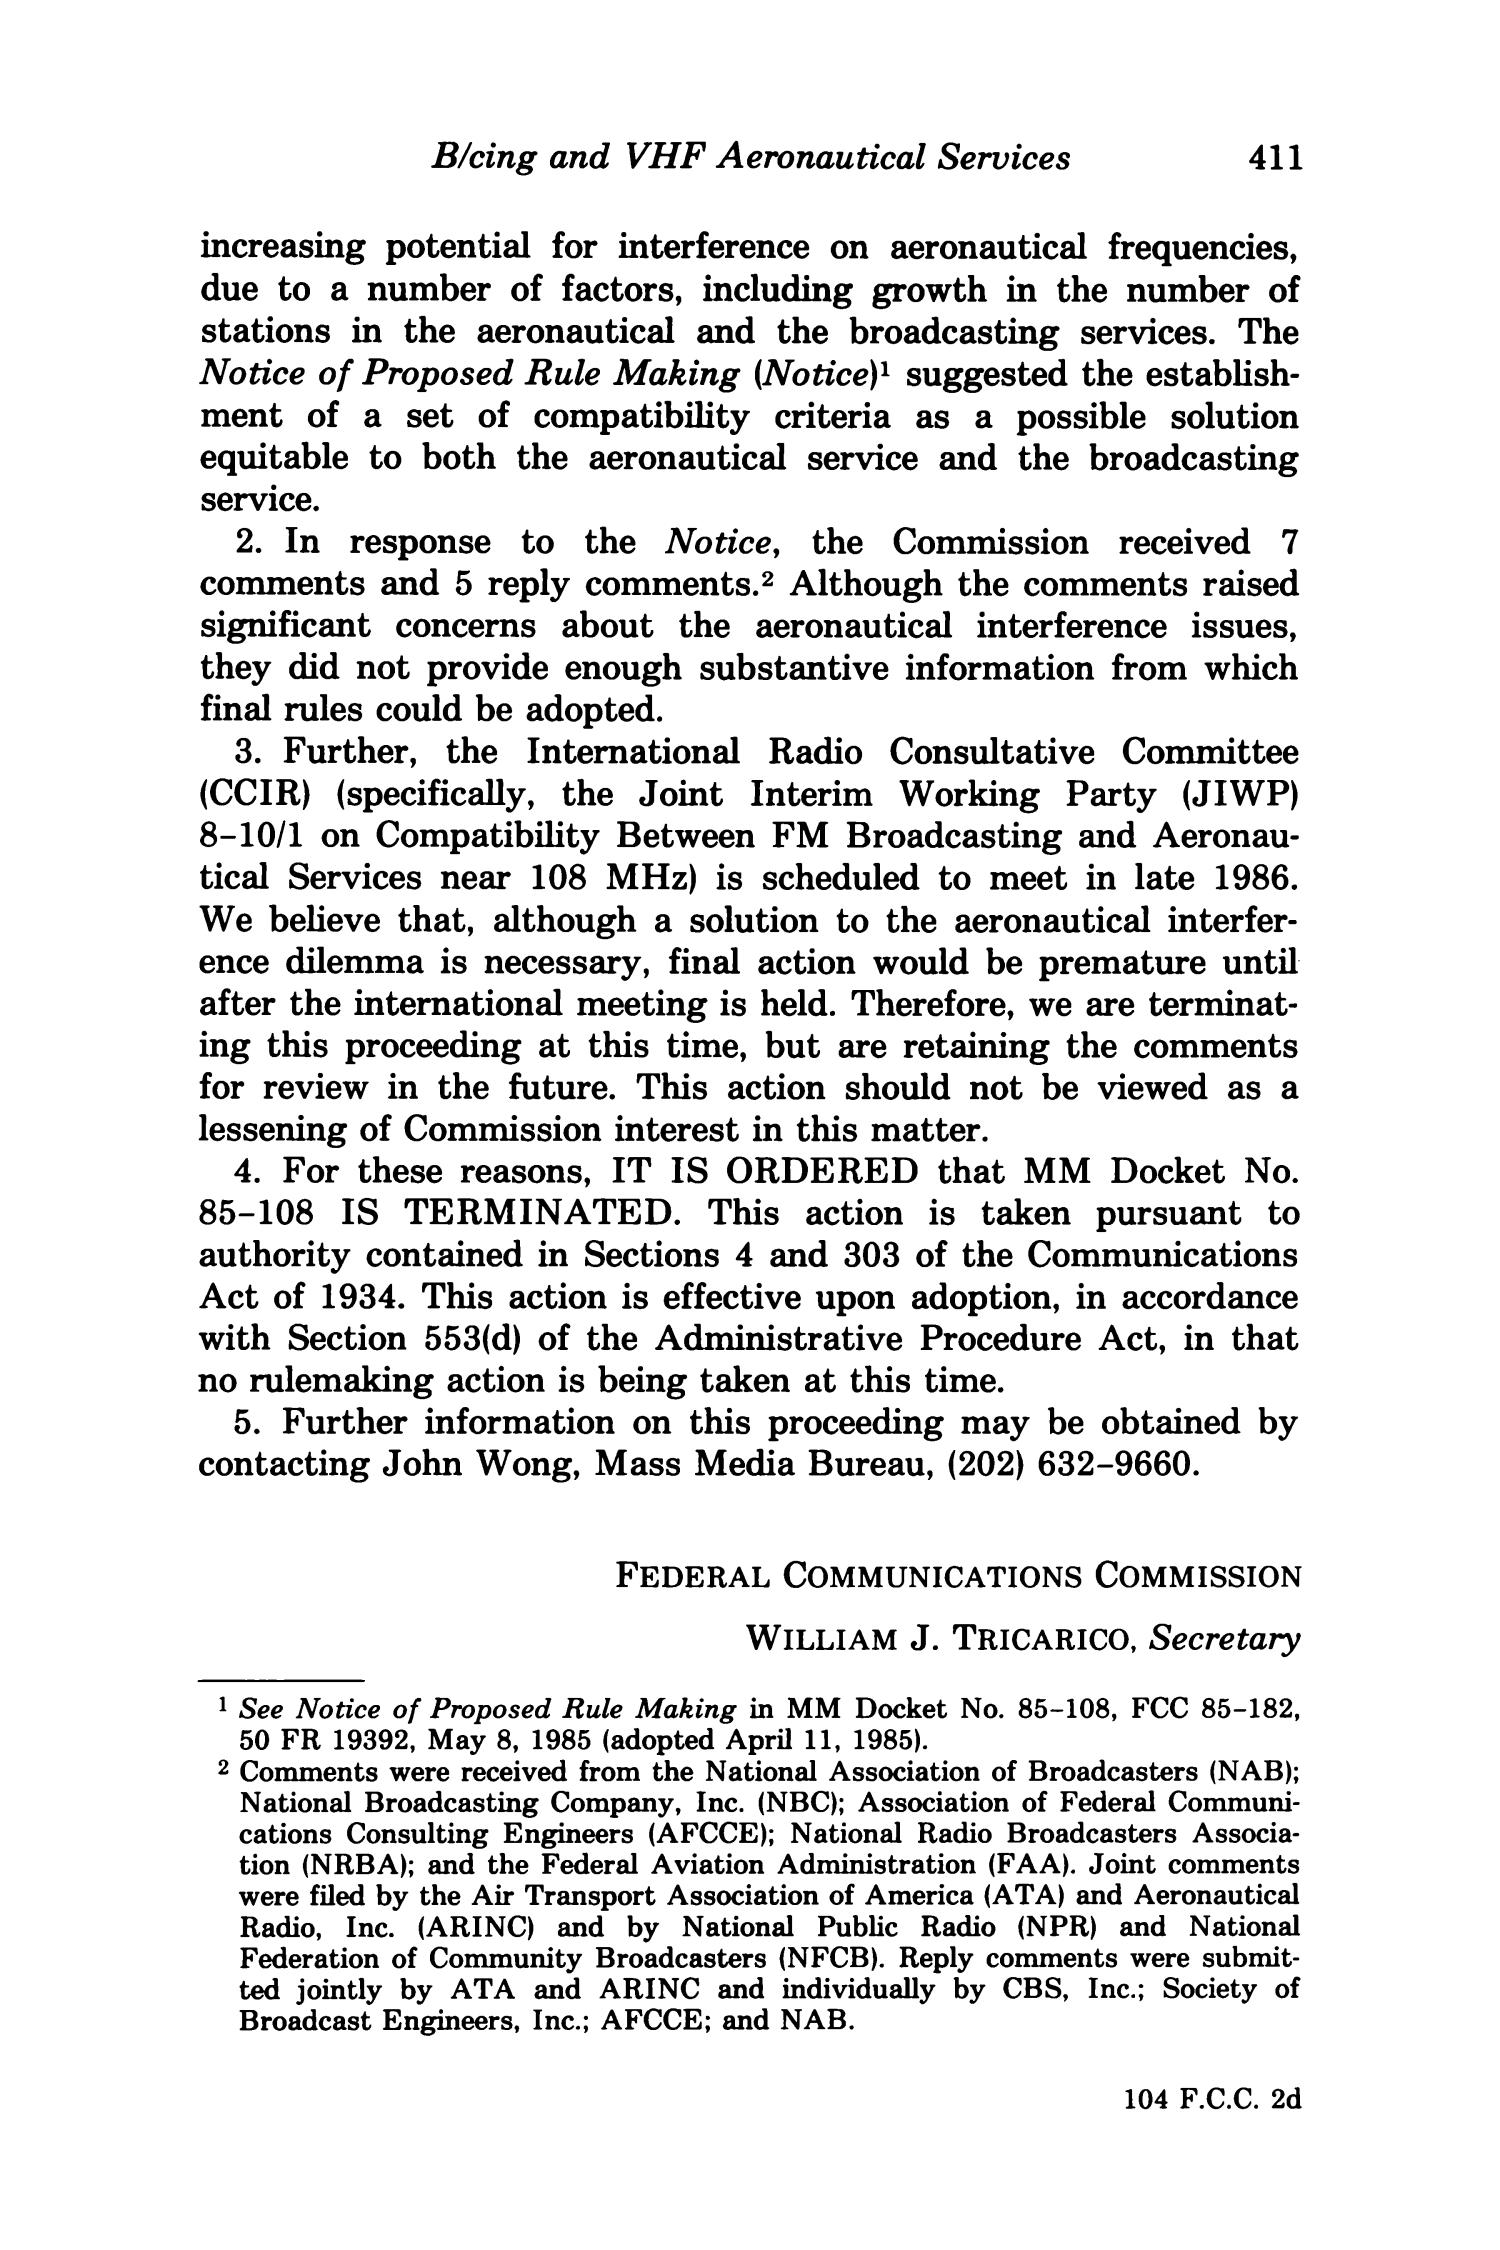 FCC Reports, Second Series, Volume 104, Number 2, Pages 375 to 719, August 1986
                                                
                                                    411
                                                